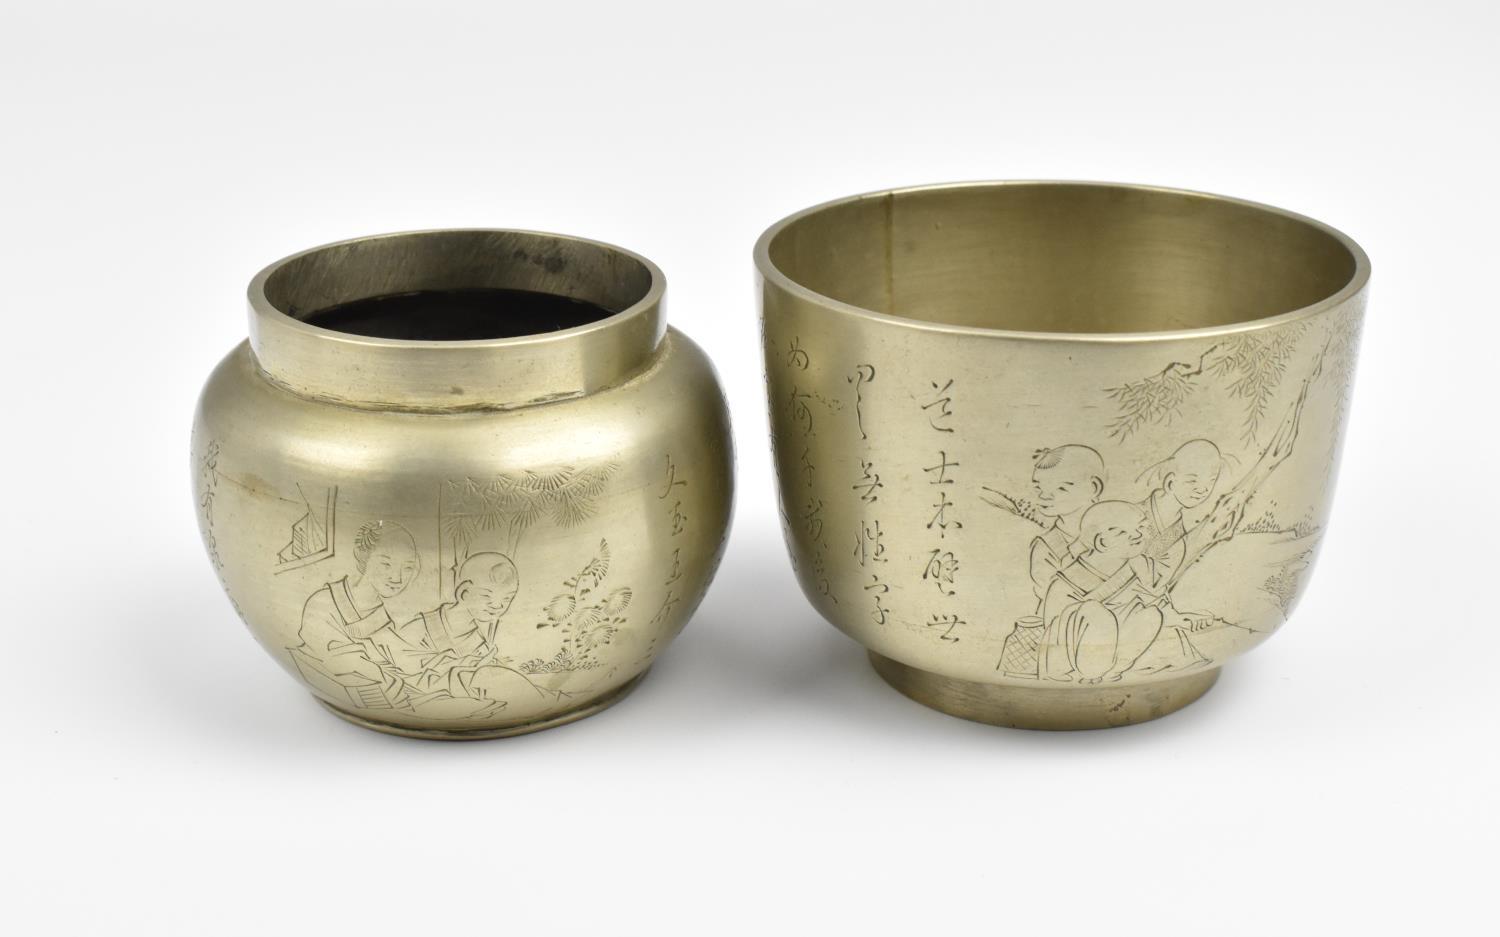 A Chinese Republic period paktong bowl and jar, both etched with calligraphy verse flanked with